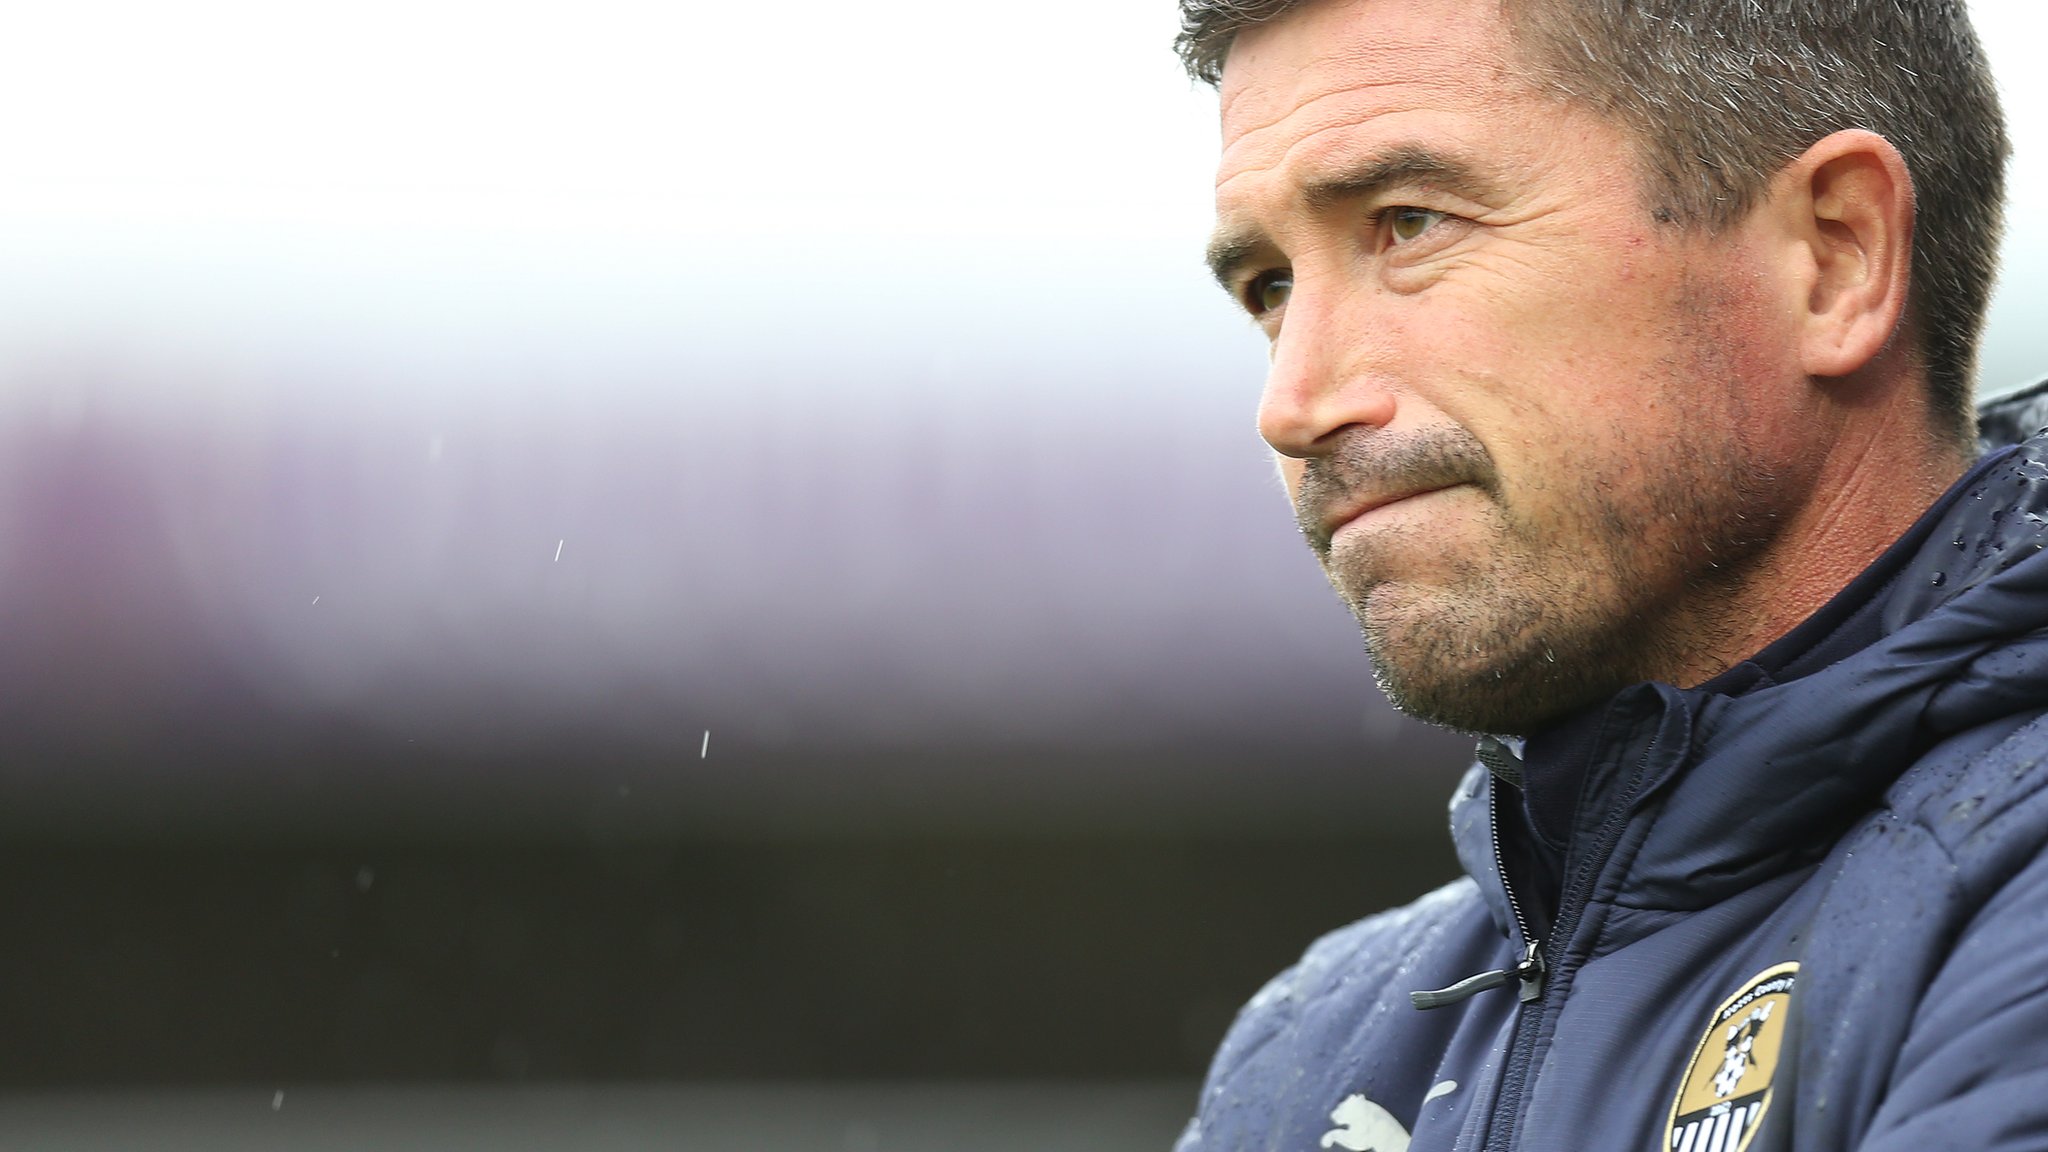 Notts County boss Kewell sacked after 10 weeks